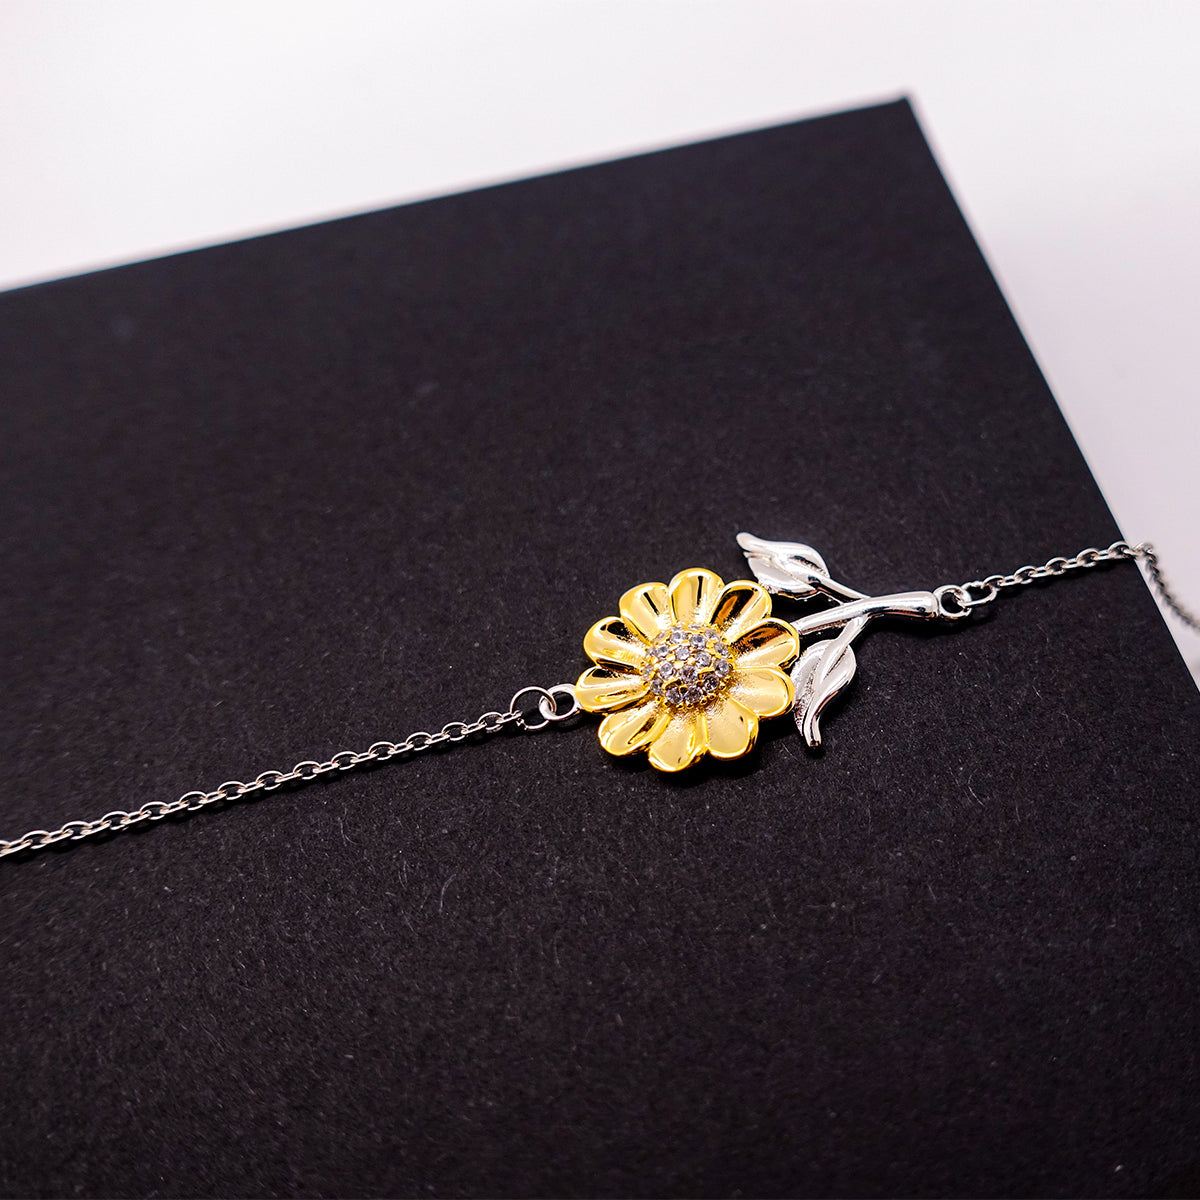 Gramps Sunflower Bracelet - Engraved with You will always have a special place in my heart - Heartfelt Gift for Grandpa on Birthday, Christmas, and Veterans Day - Unique Jewelry for Grandparents to show Love and Appreciation